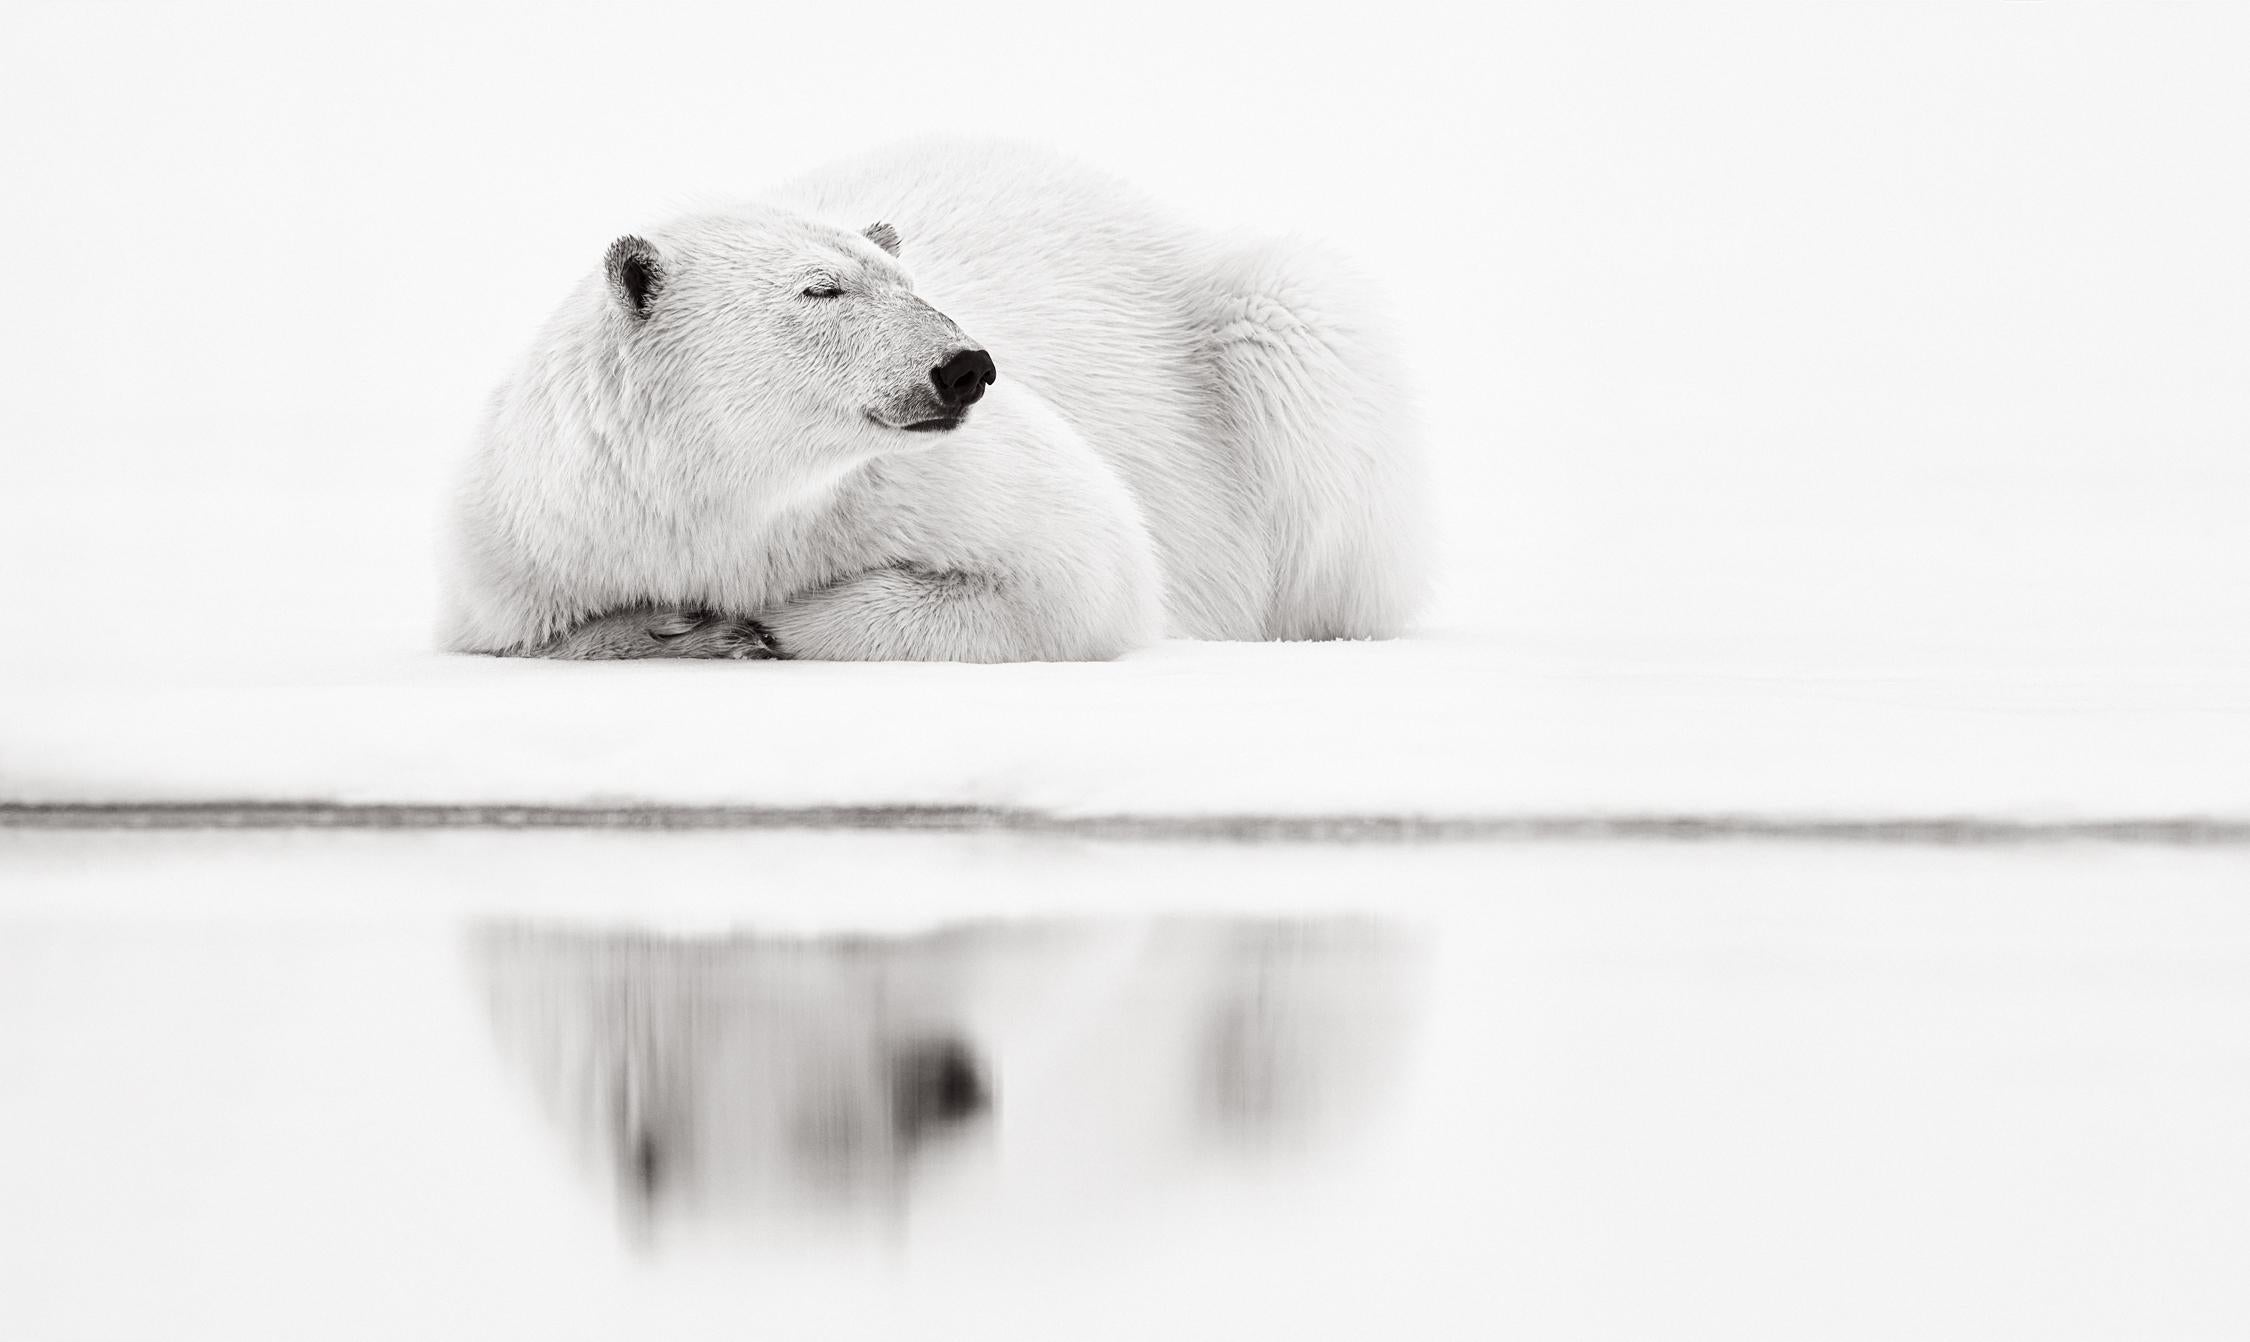 Drew Doggett Black and White Photograph - A polar bear resting at water's edge peacefully all but disappears into the back